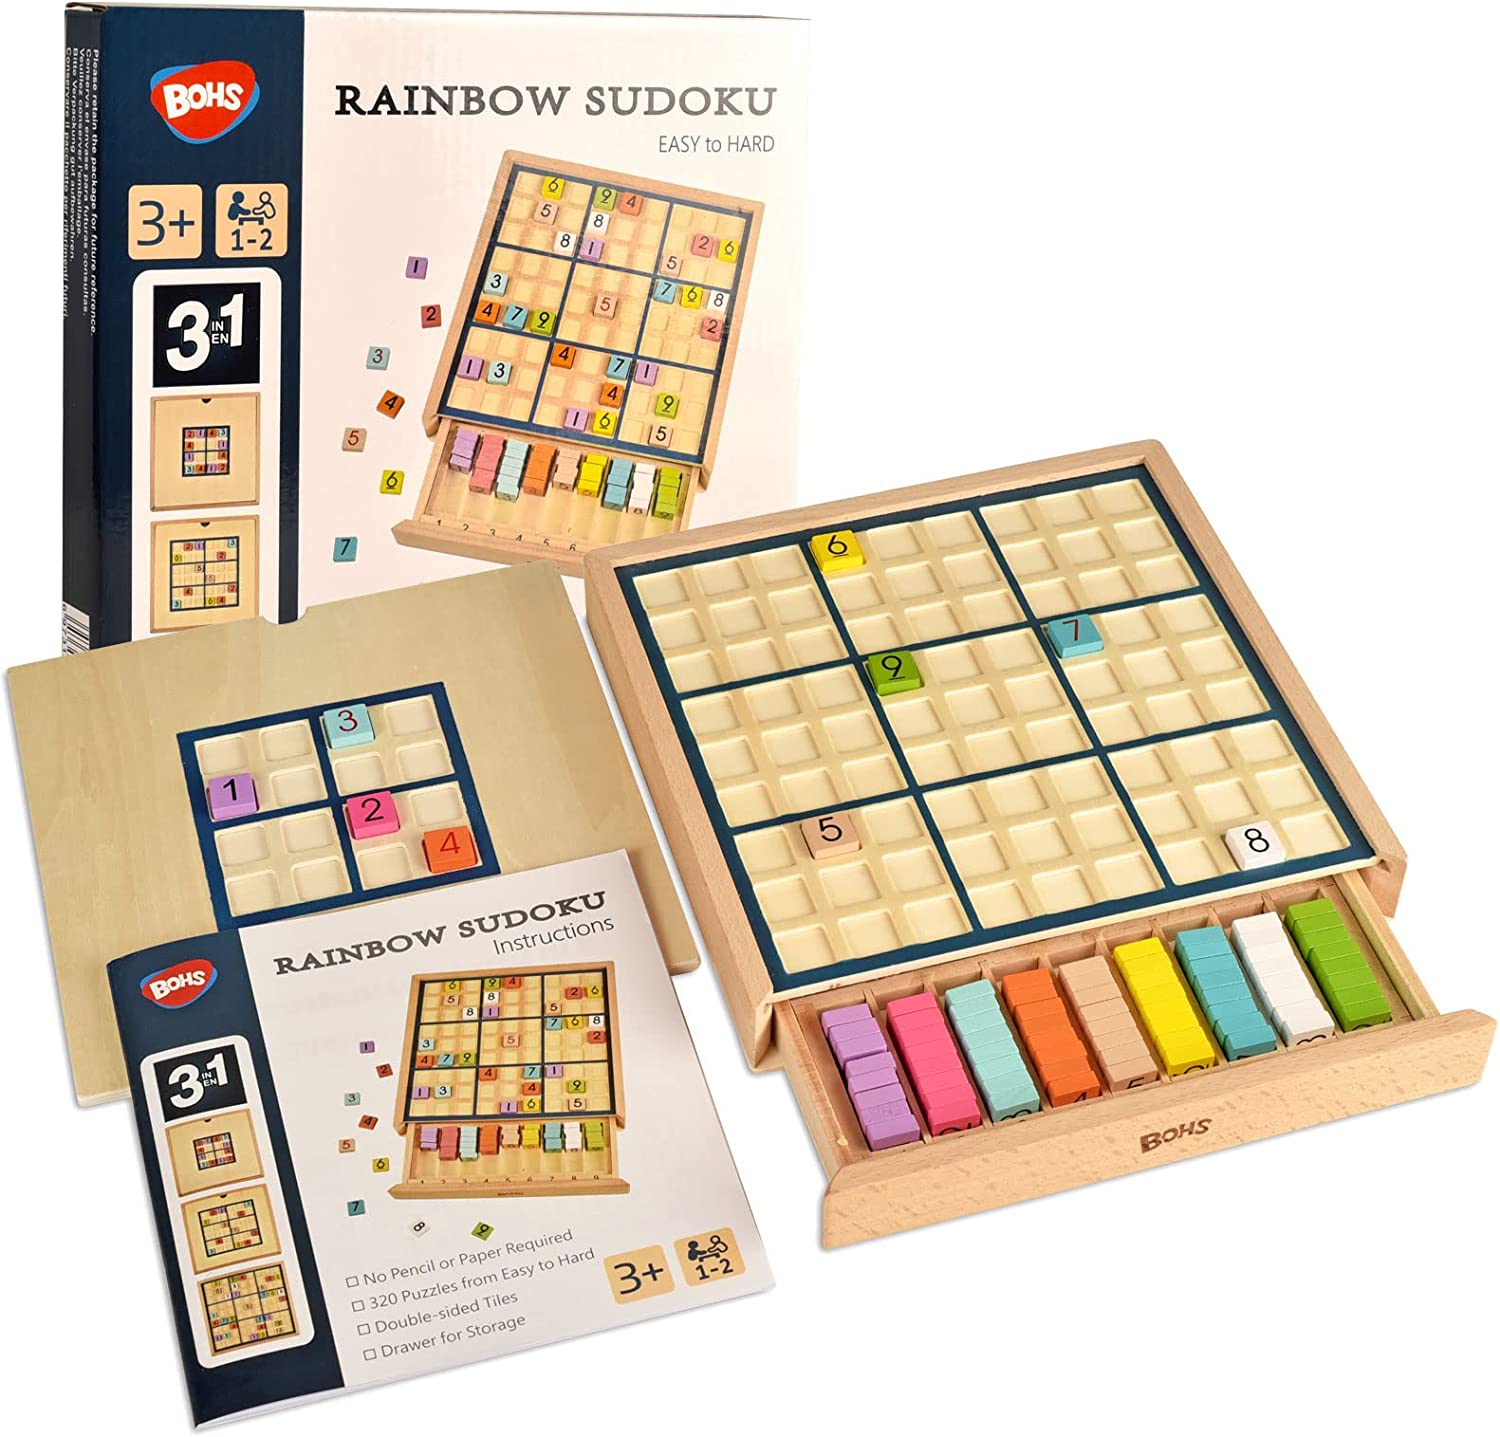 Sudoku - Puzzle Number Game